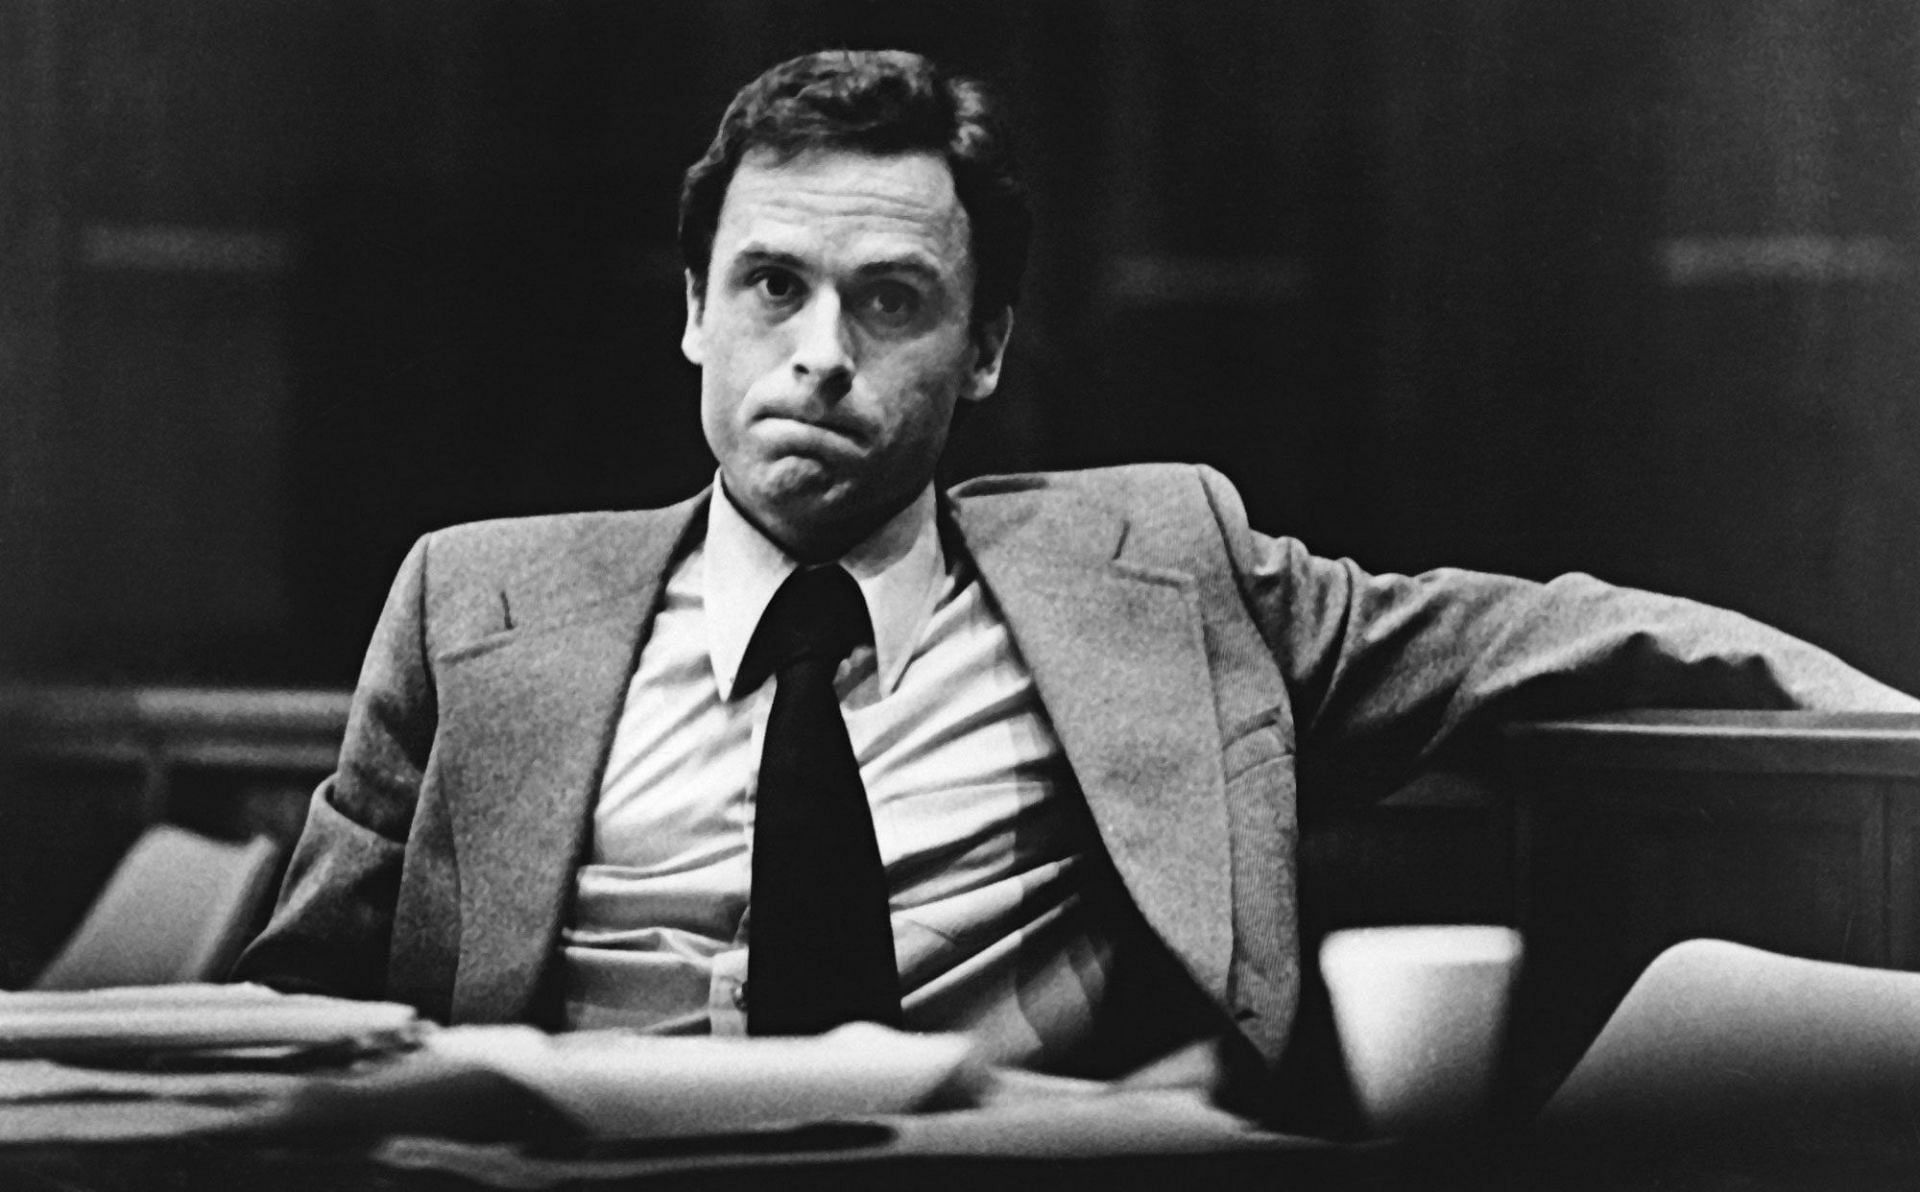 Crime scene and execution photos of Ted Bundy released (image via AP)